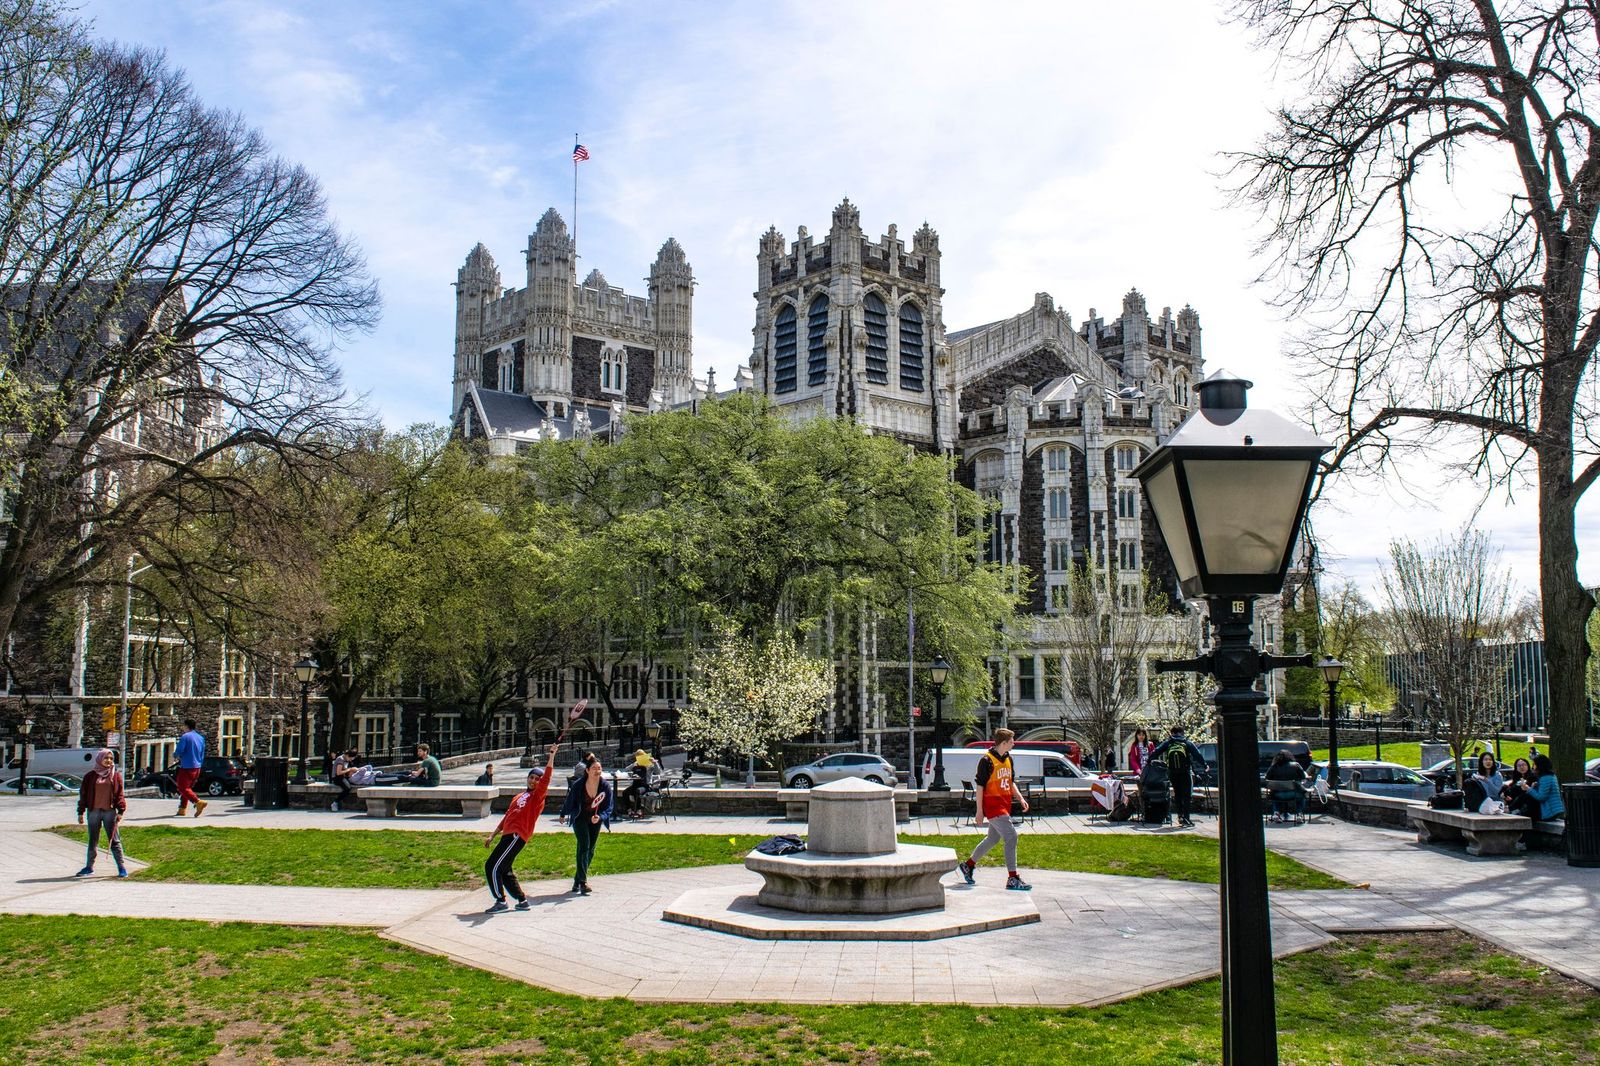 CCNY’s “Summer at City” program offers alluring courses | The City College of New York